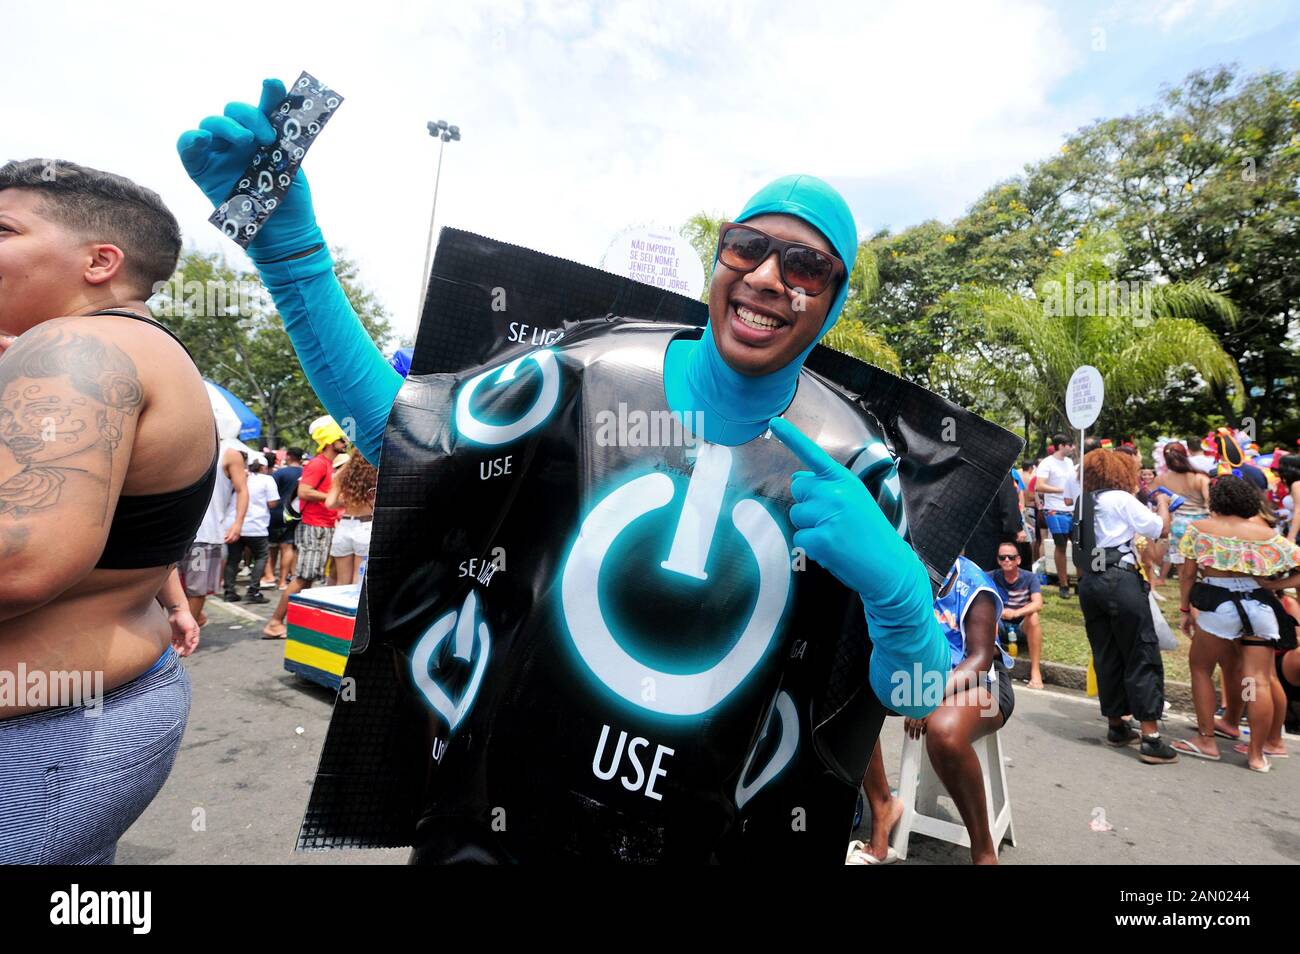 Street Carnival, South America, Brazil - March 4, 2019: A reveler dressed up like condoms performs during the Carnival in Rio de Janeiro. Stock Photo